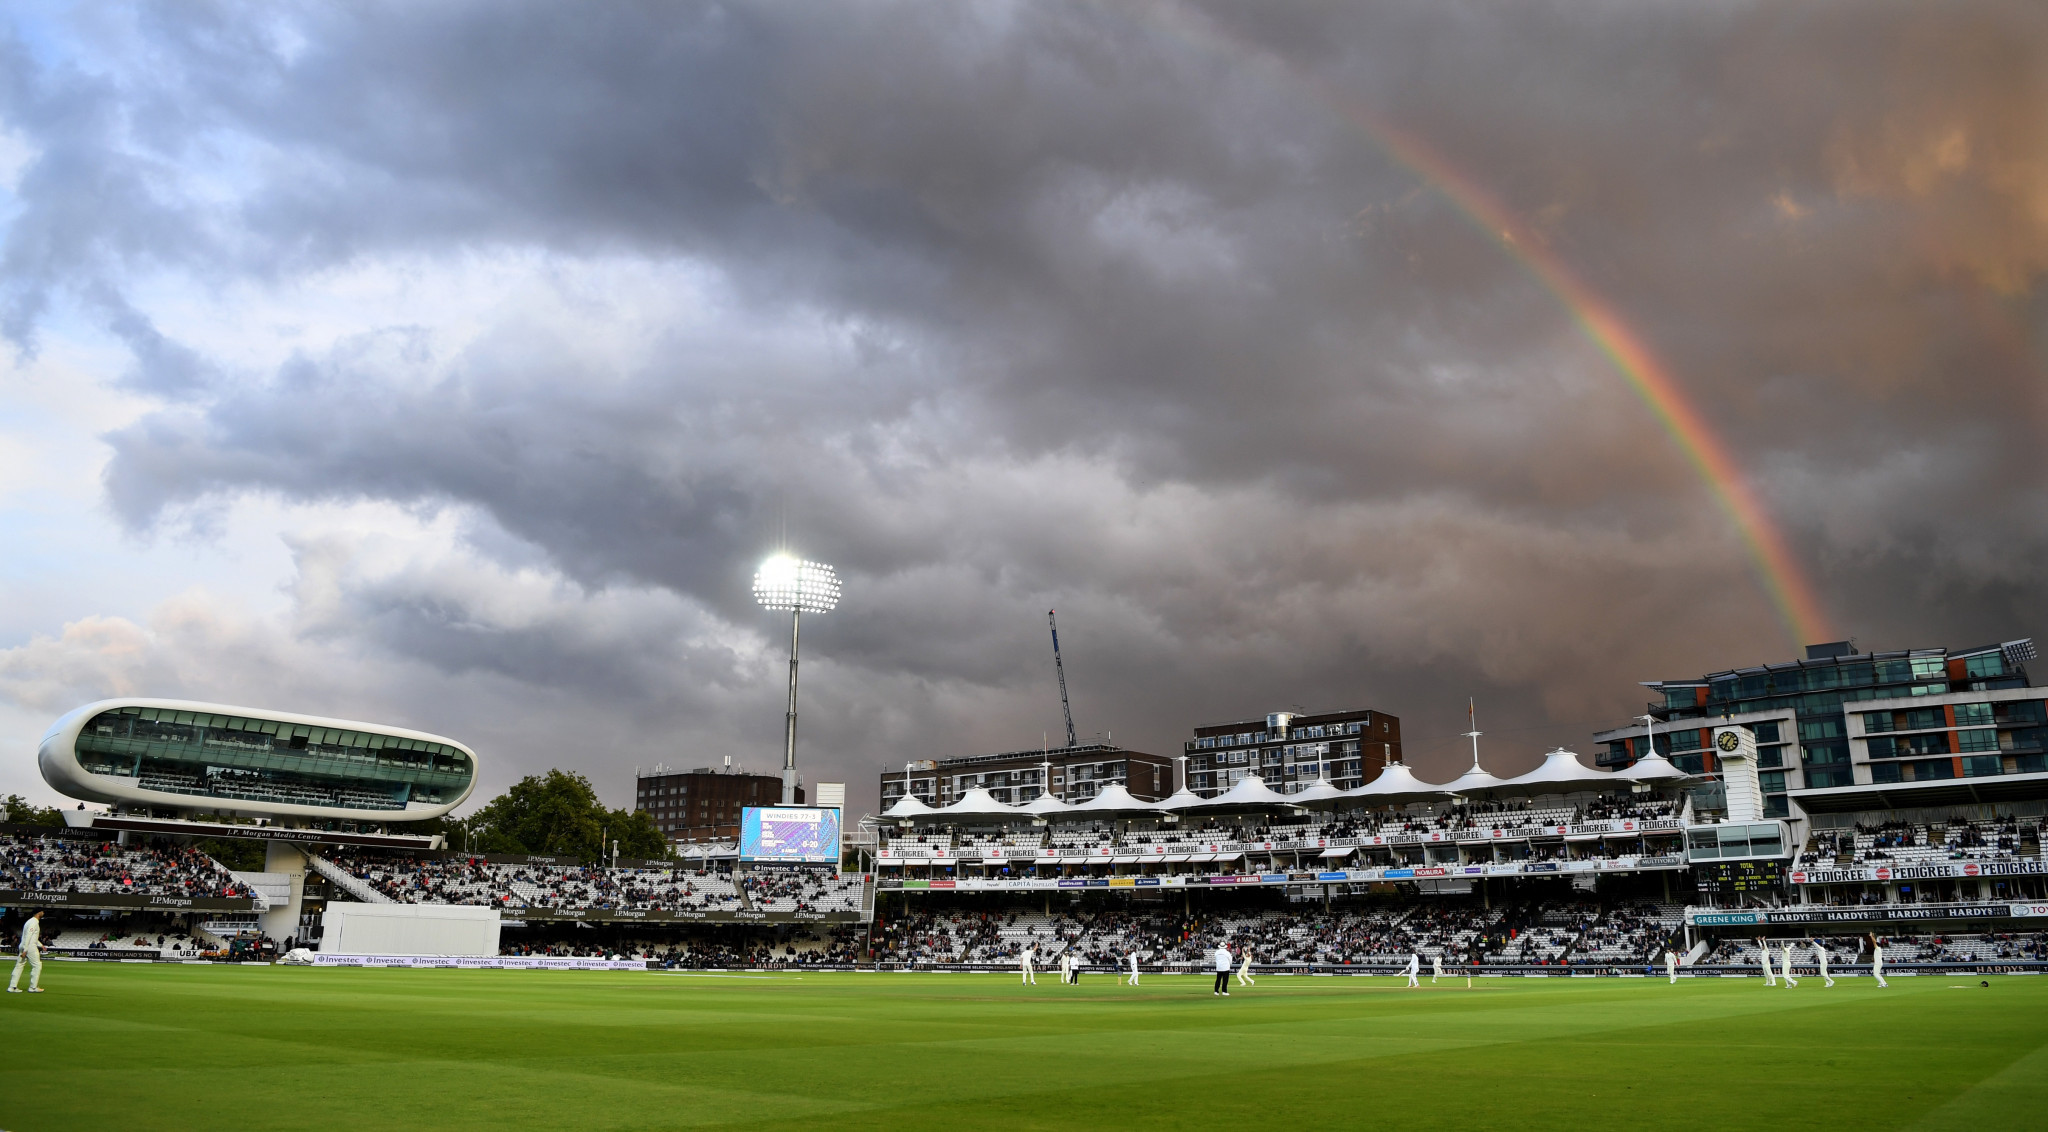 Marylebone Cricket Club owns the iconic Lord's Cricket Ground ©Getty Images